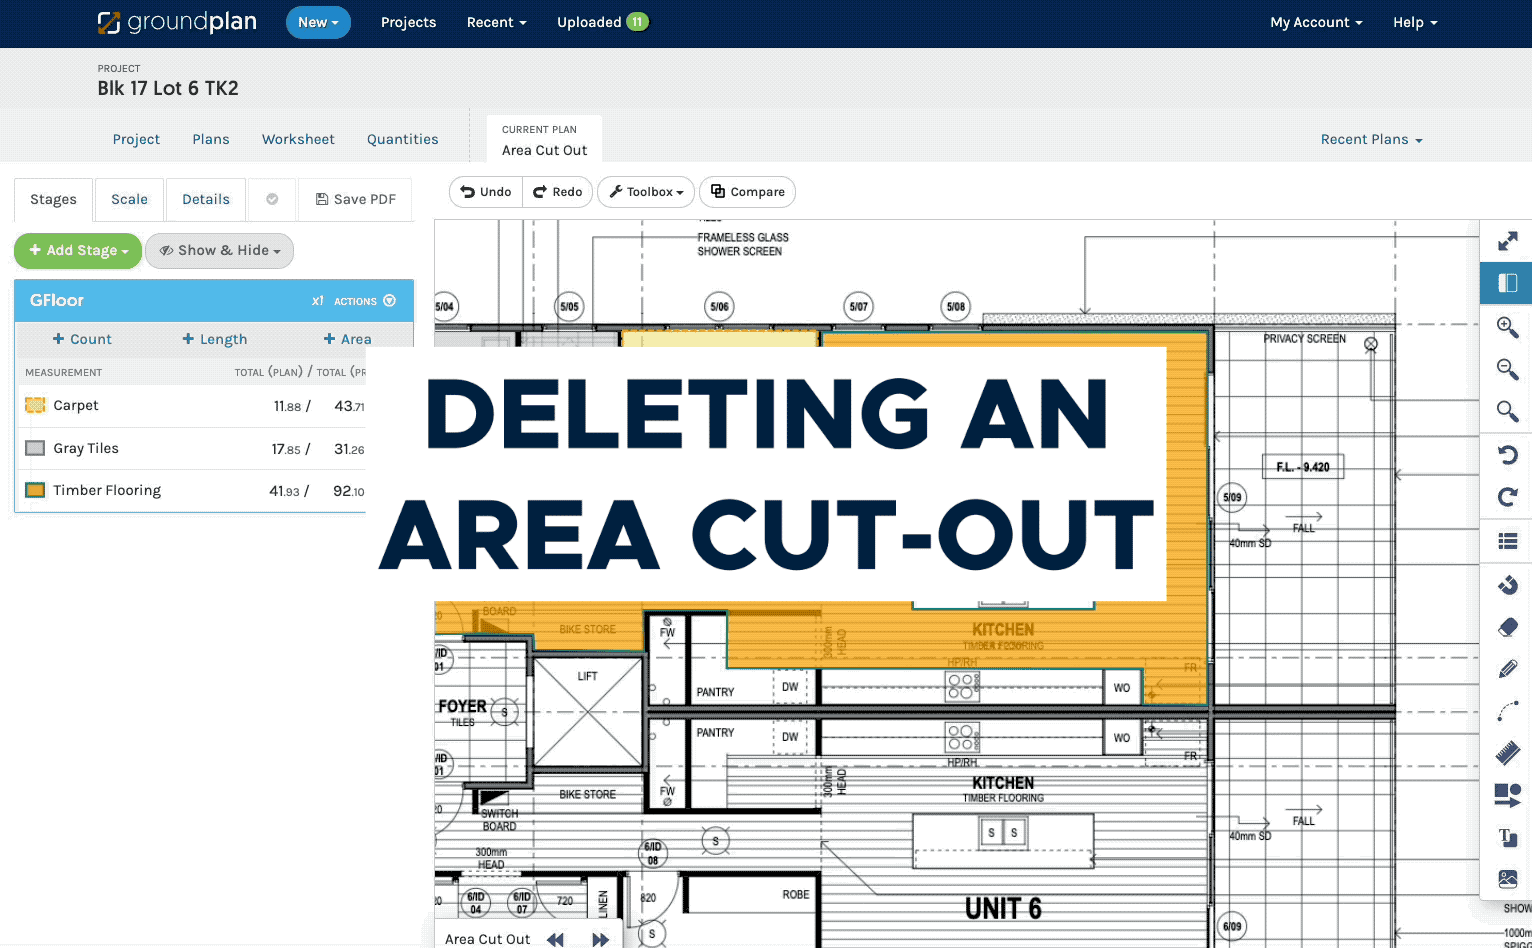 D1 - Deleting an Area Cut-out